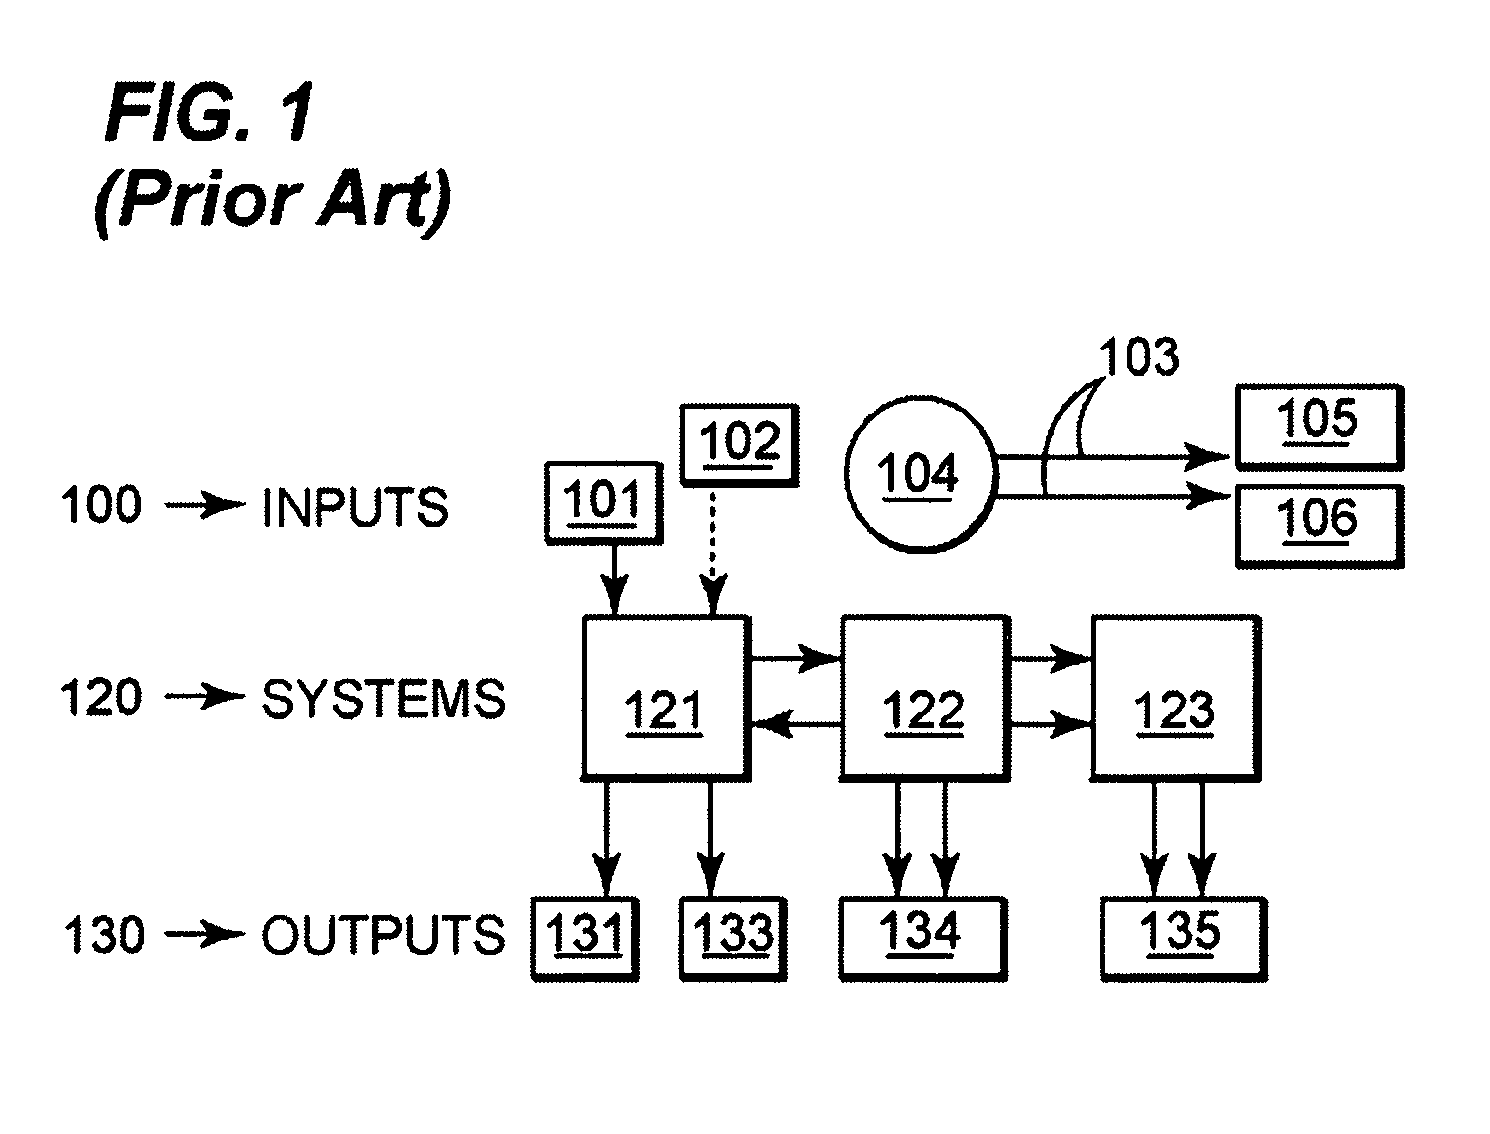 System and methods for providing mass notification using existing fire system